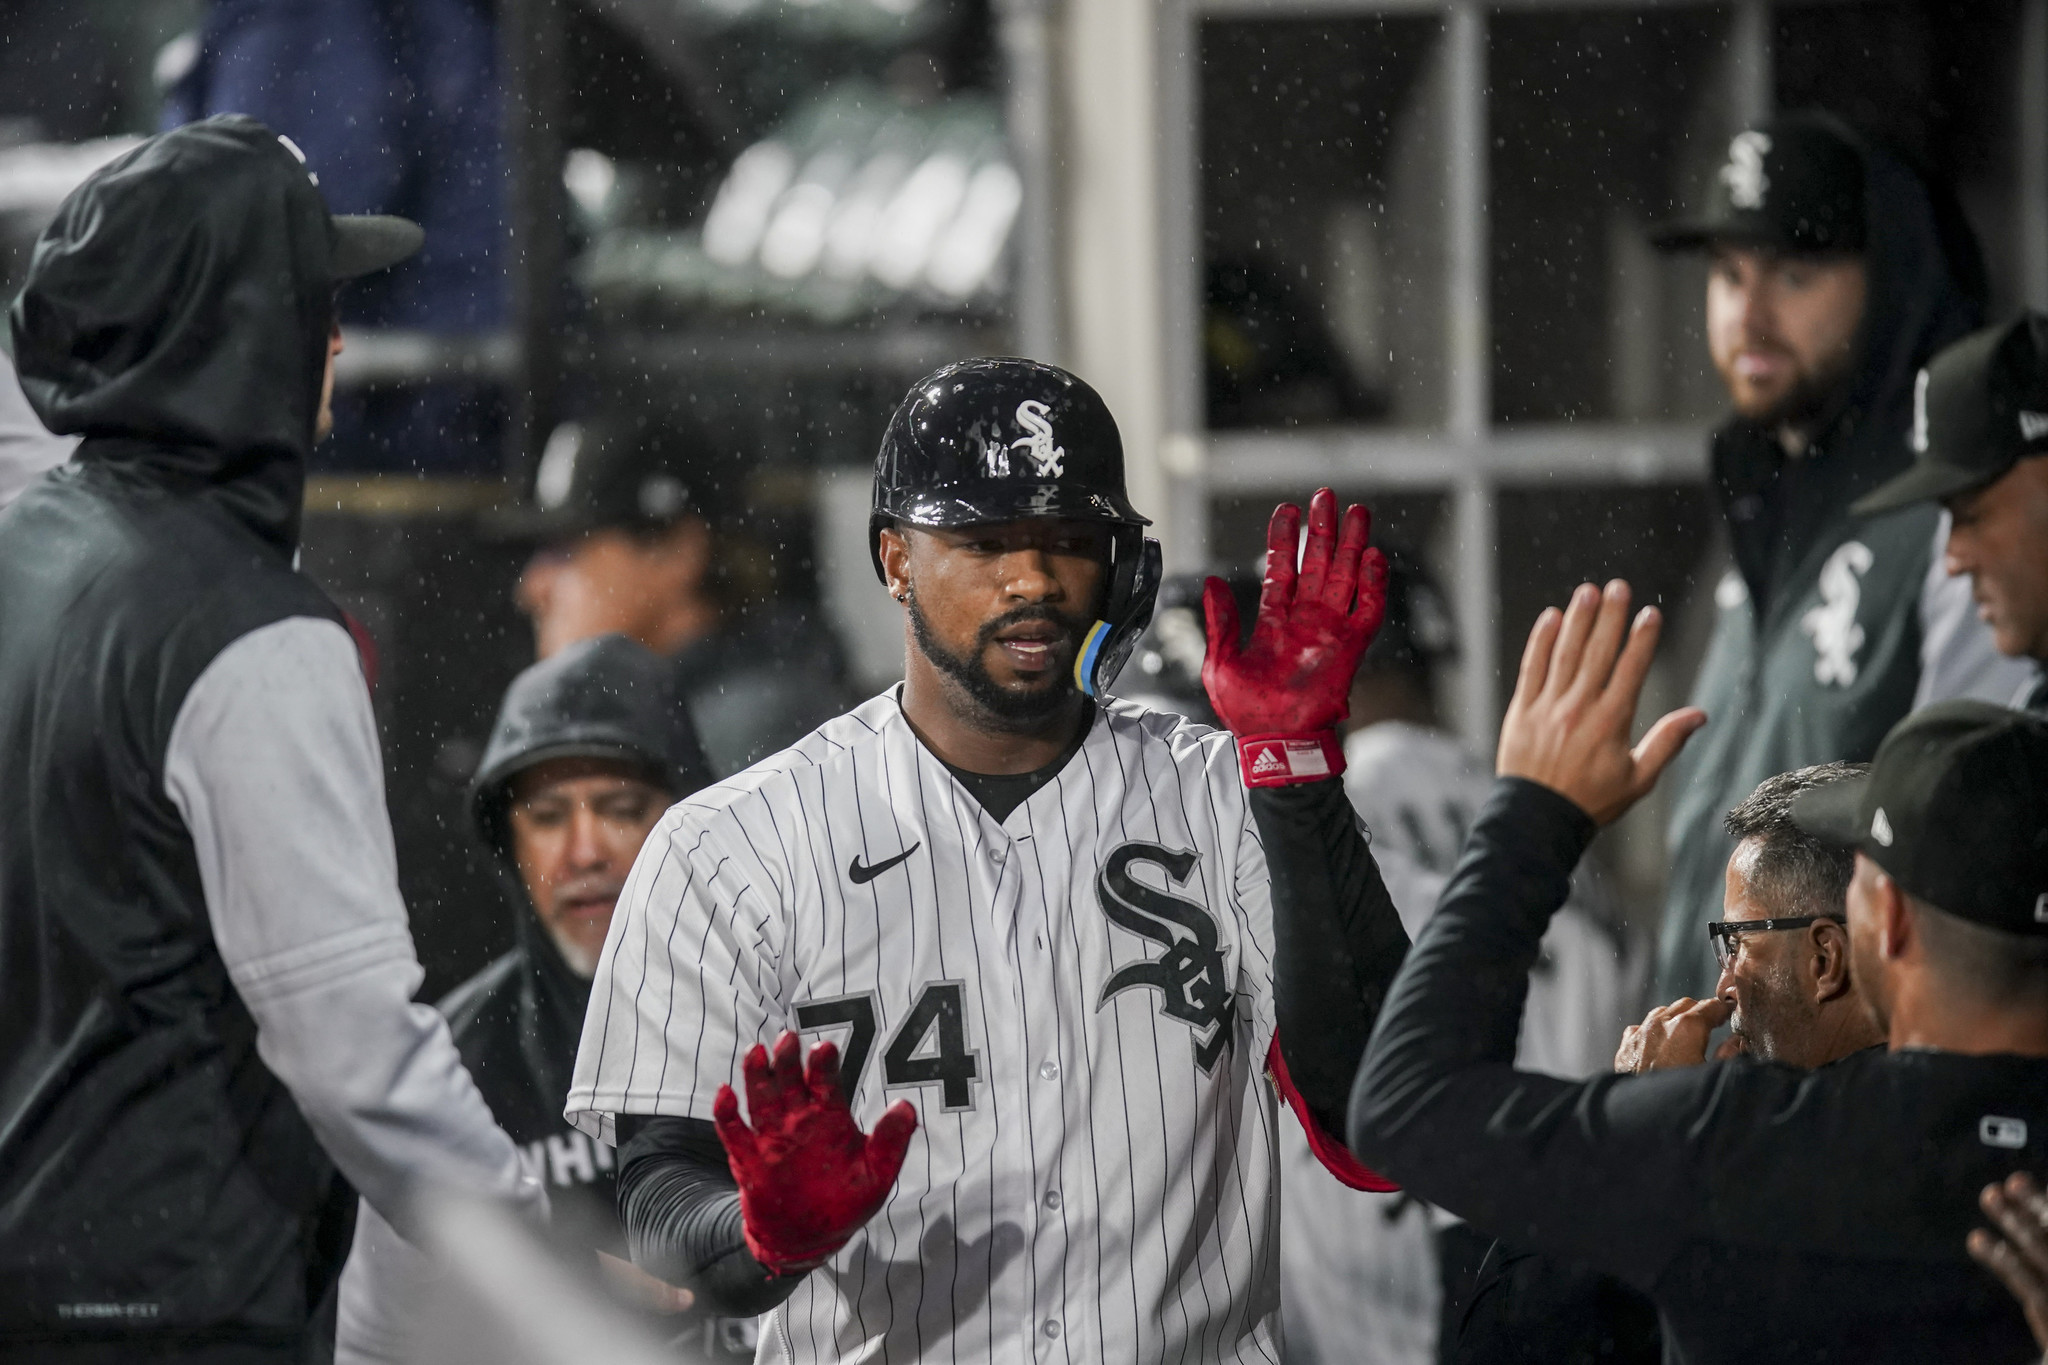 White Sox's Eloy Jiménez out 4-6 weeks after appendectomy